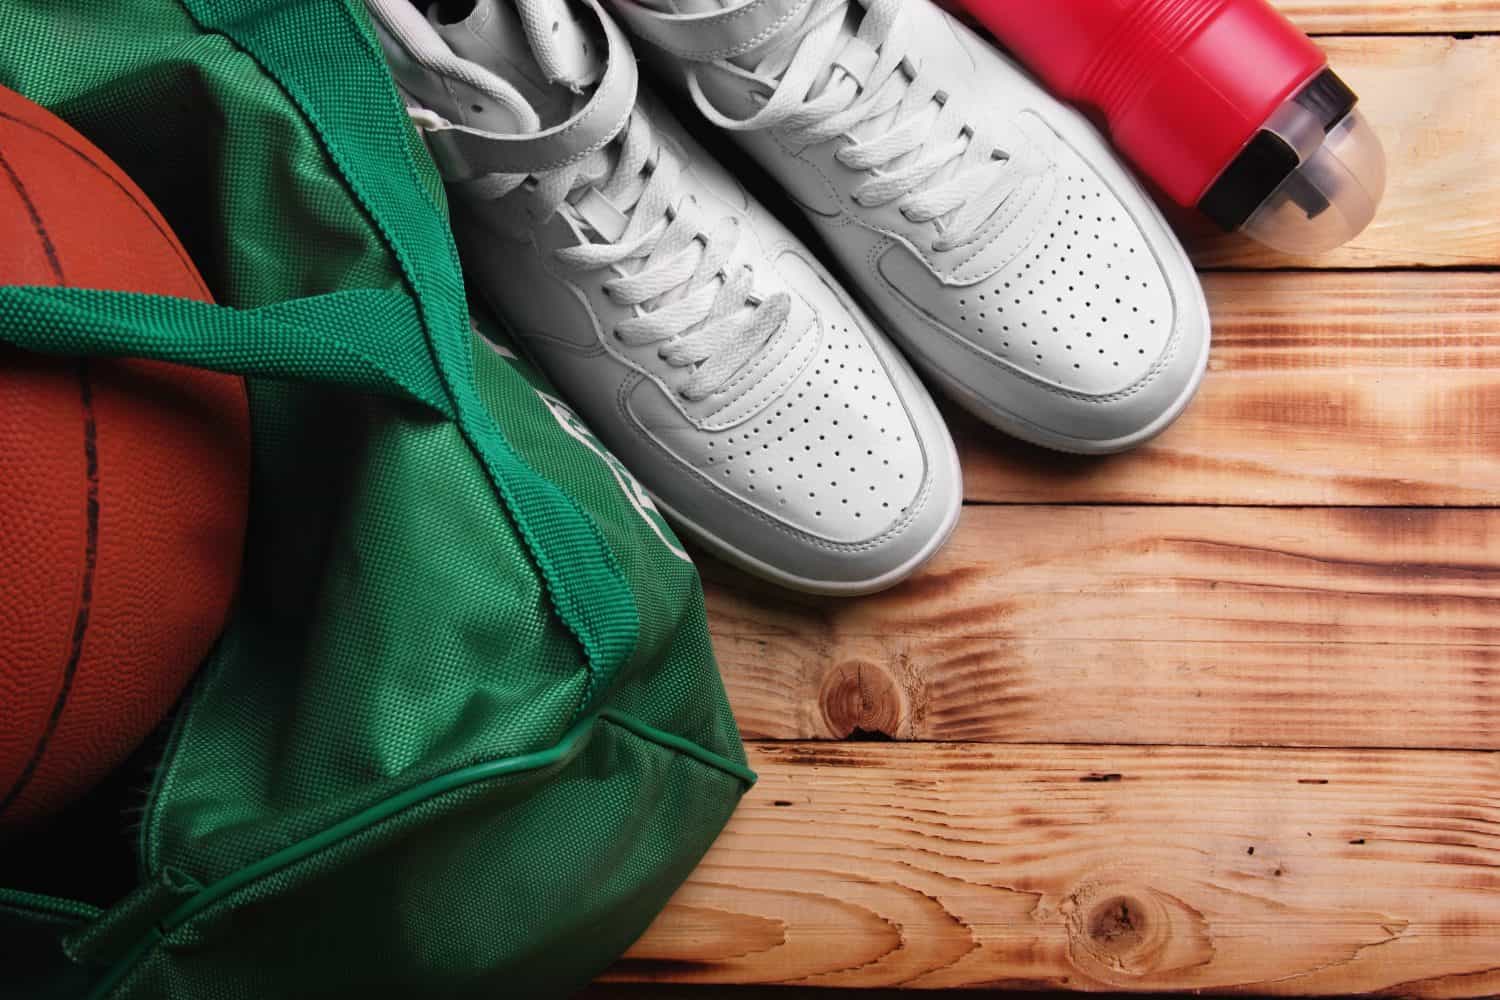 High white sneakers , Sport bag Basketball ball inside the bag, bottle with .Top of white background down wooden background..Concept basketball training free space.Selective focus ball defocused